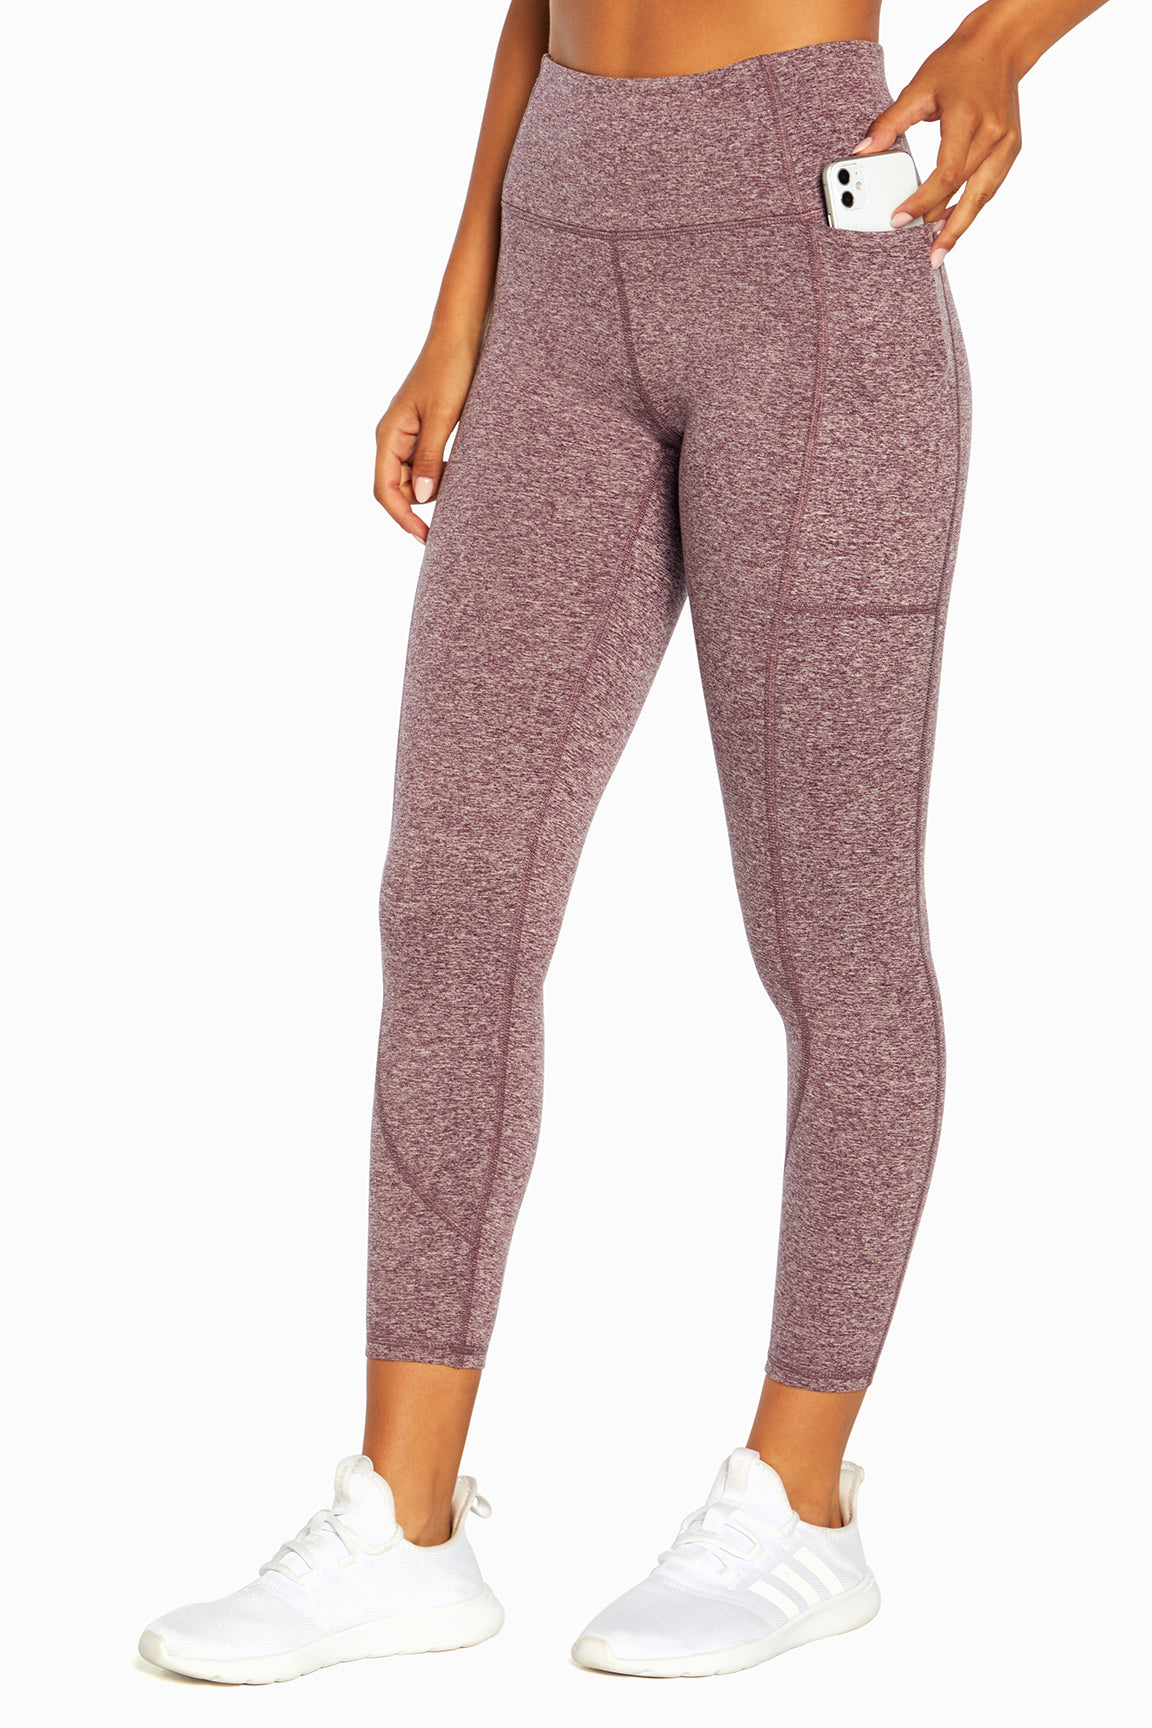 Balance Collection Cam Tummy Control Pocket Legging at YogaOutlet.com -  Free Shipping –